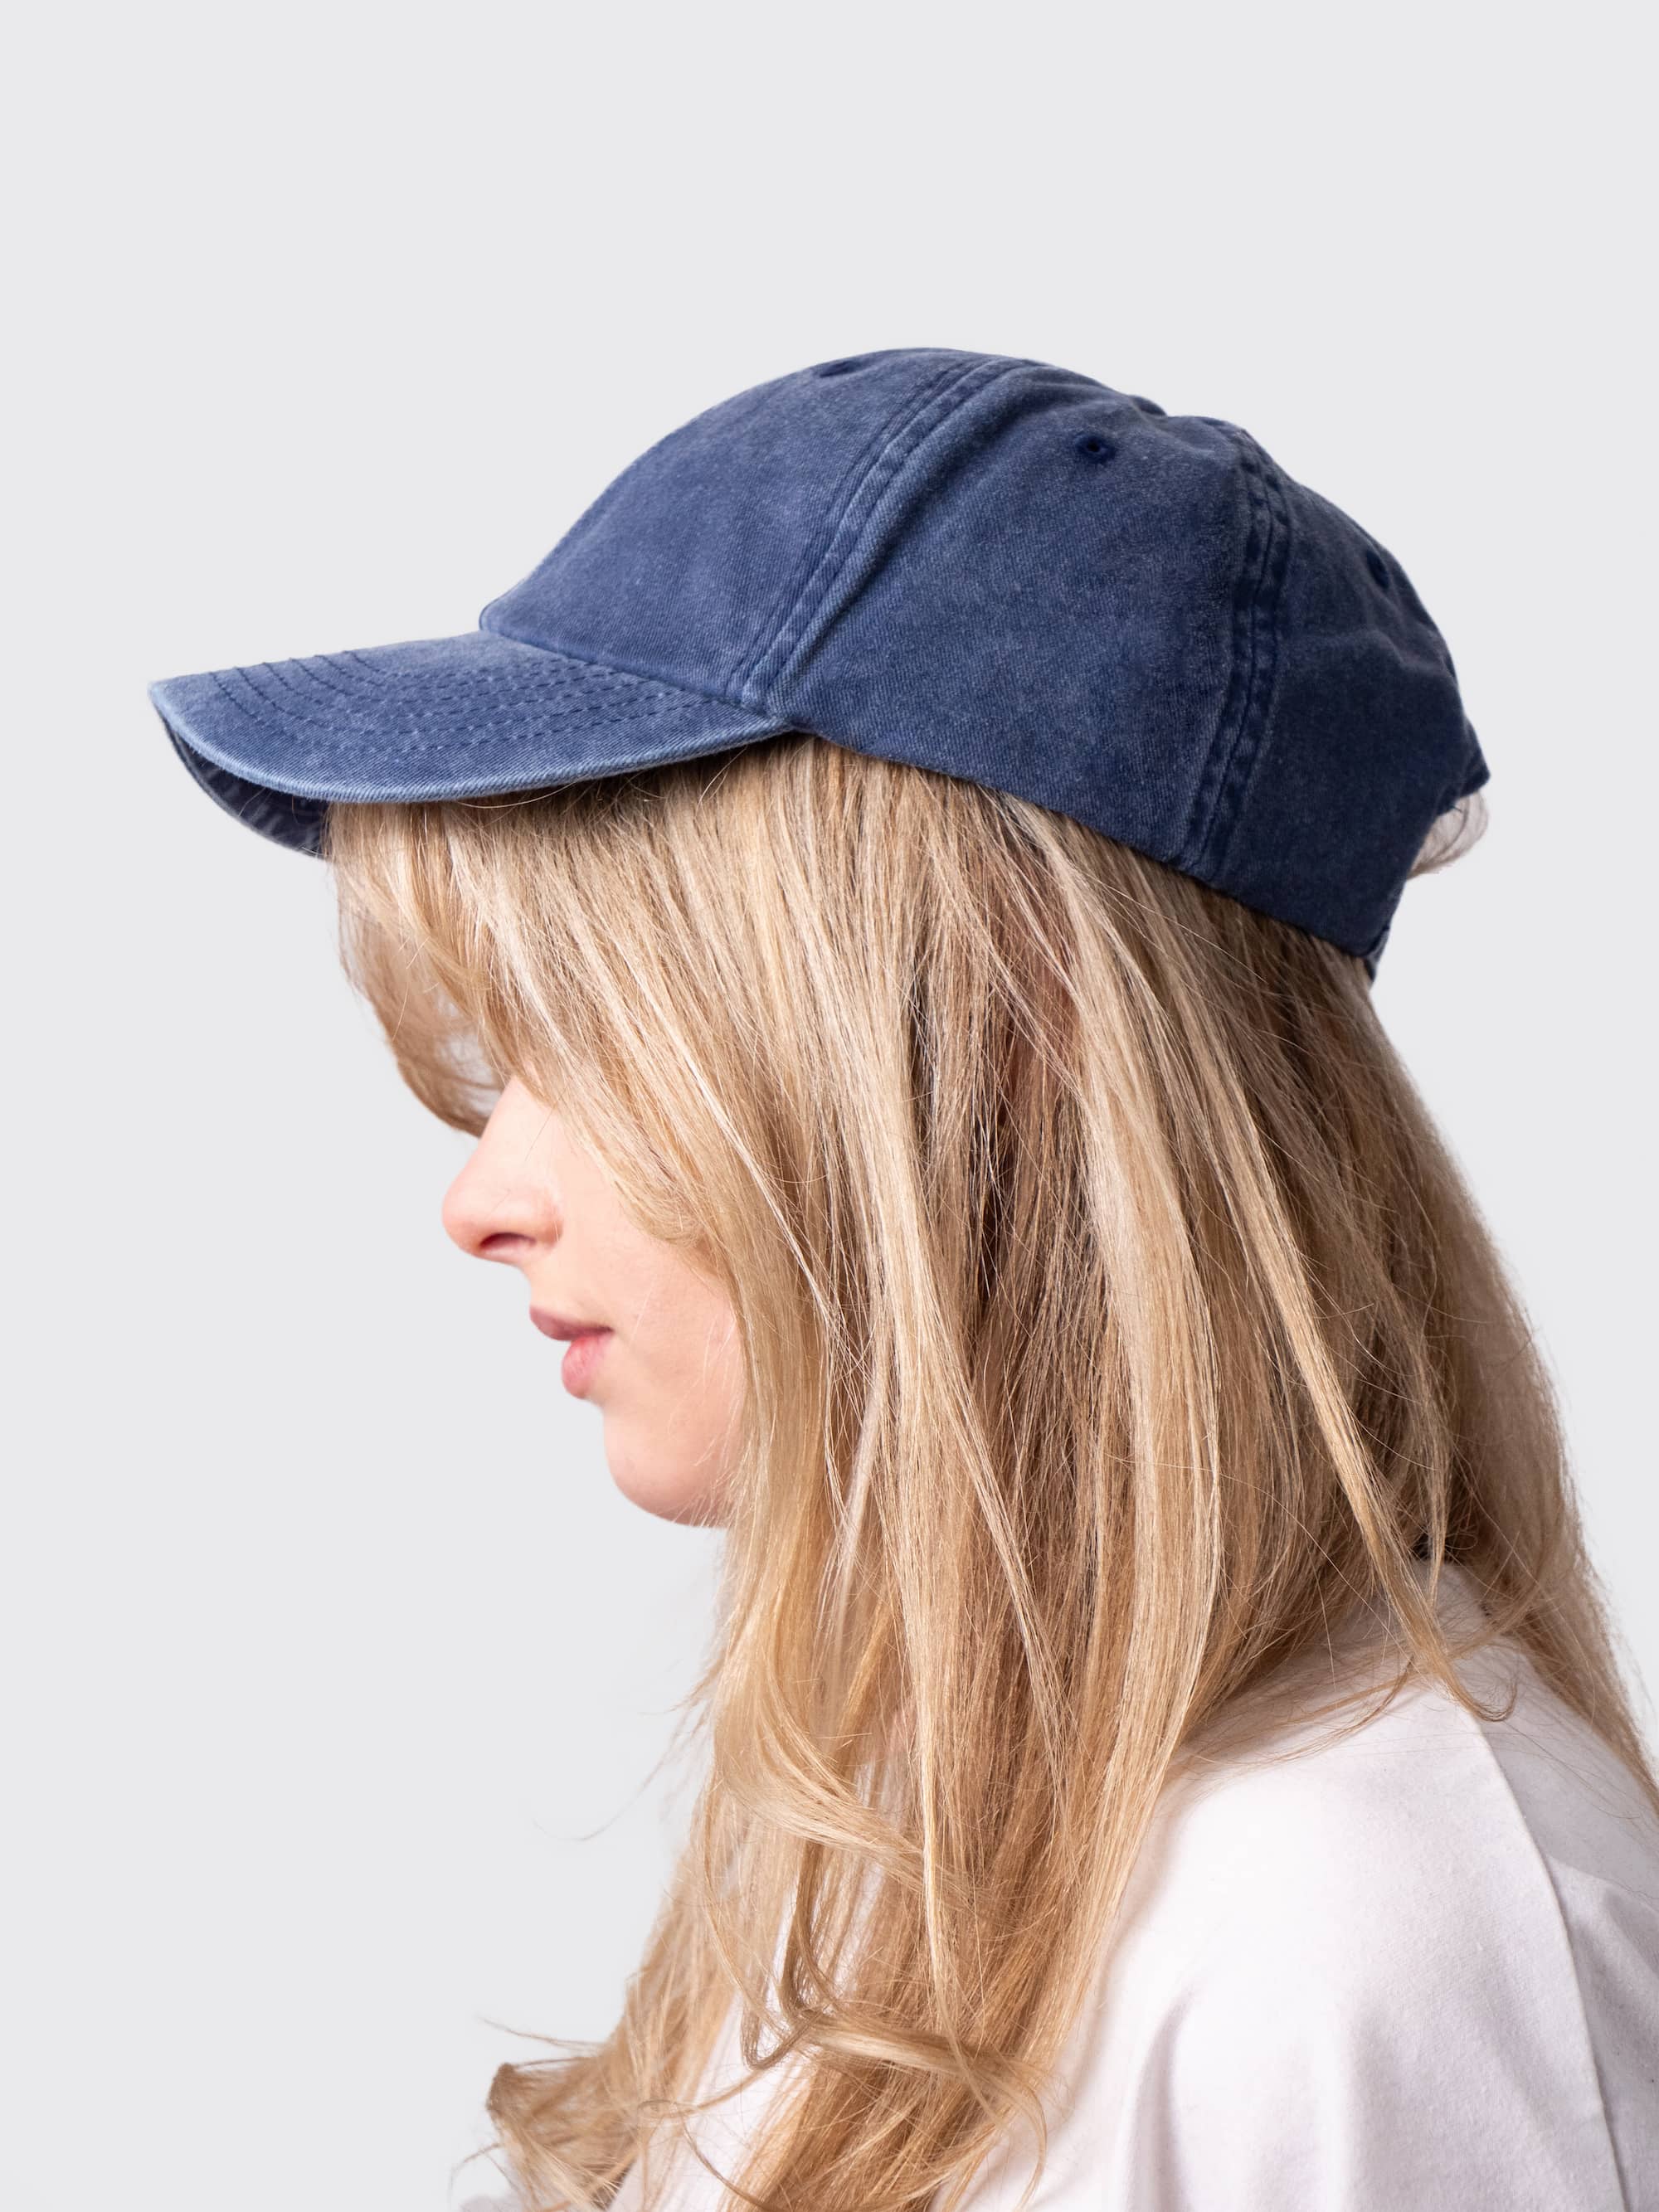 Denim vintage cap, with embroidered South crest